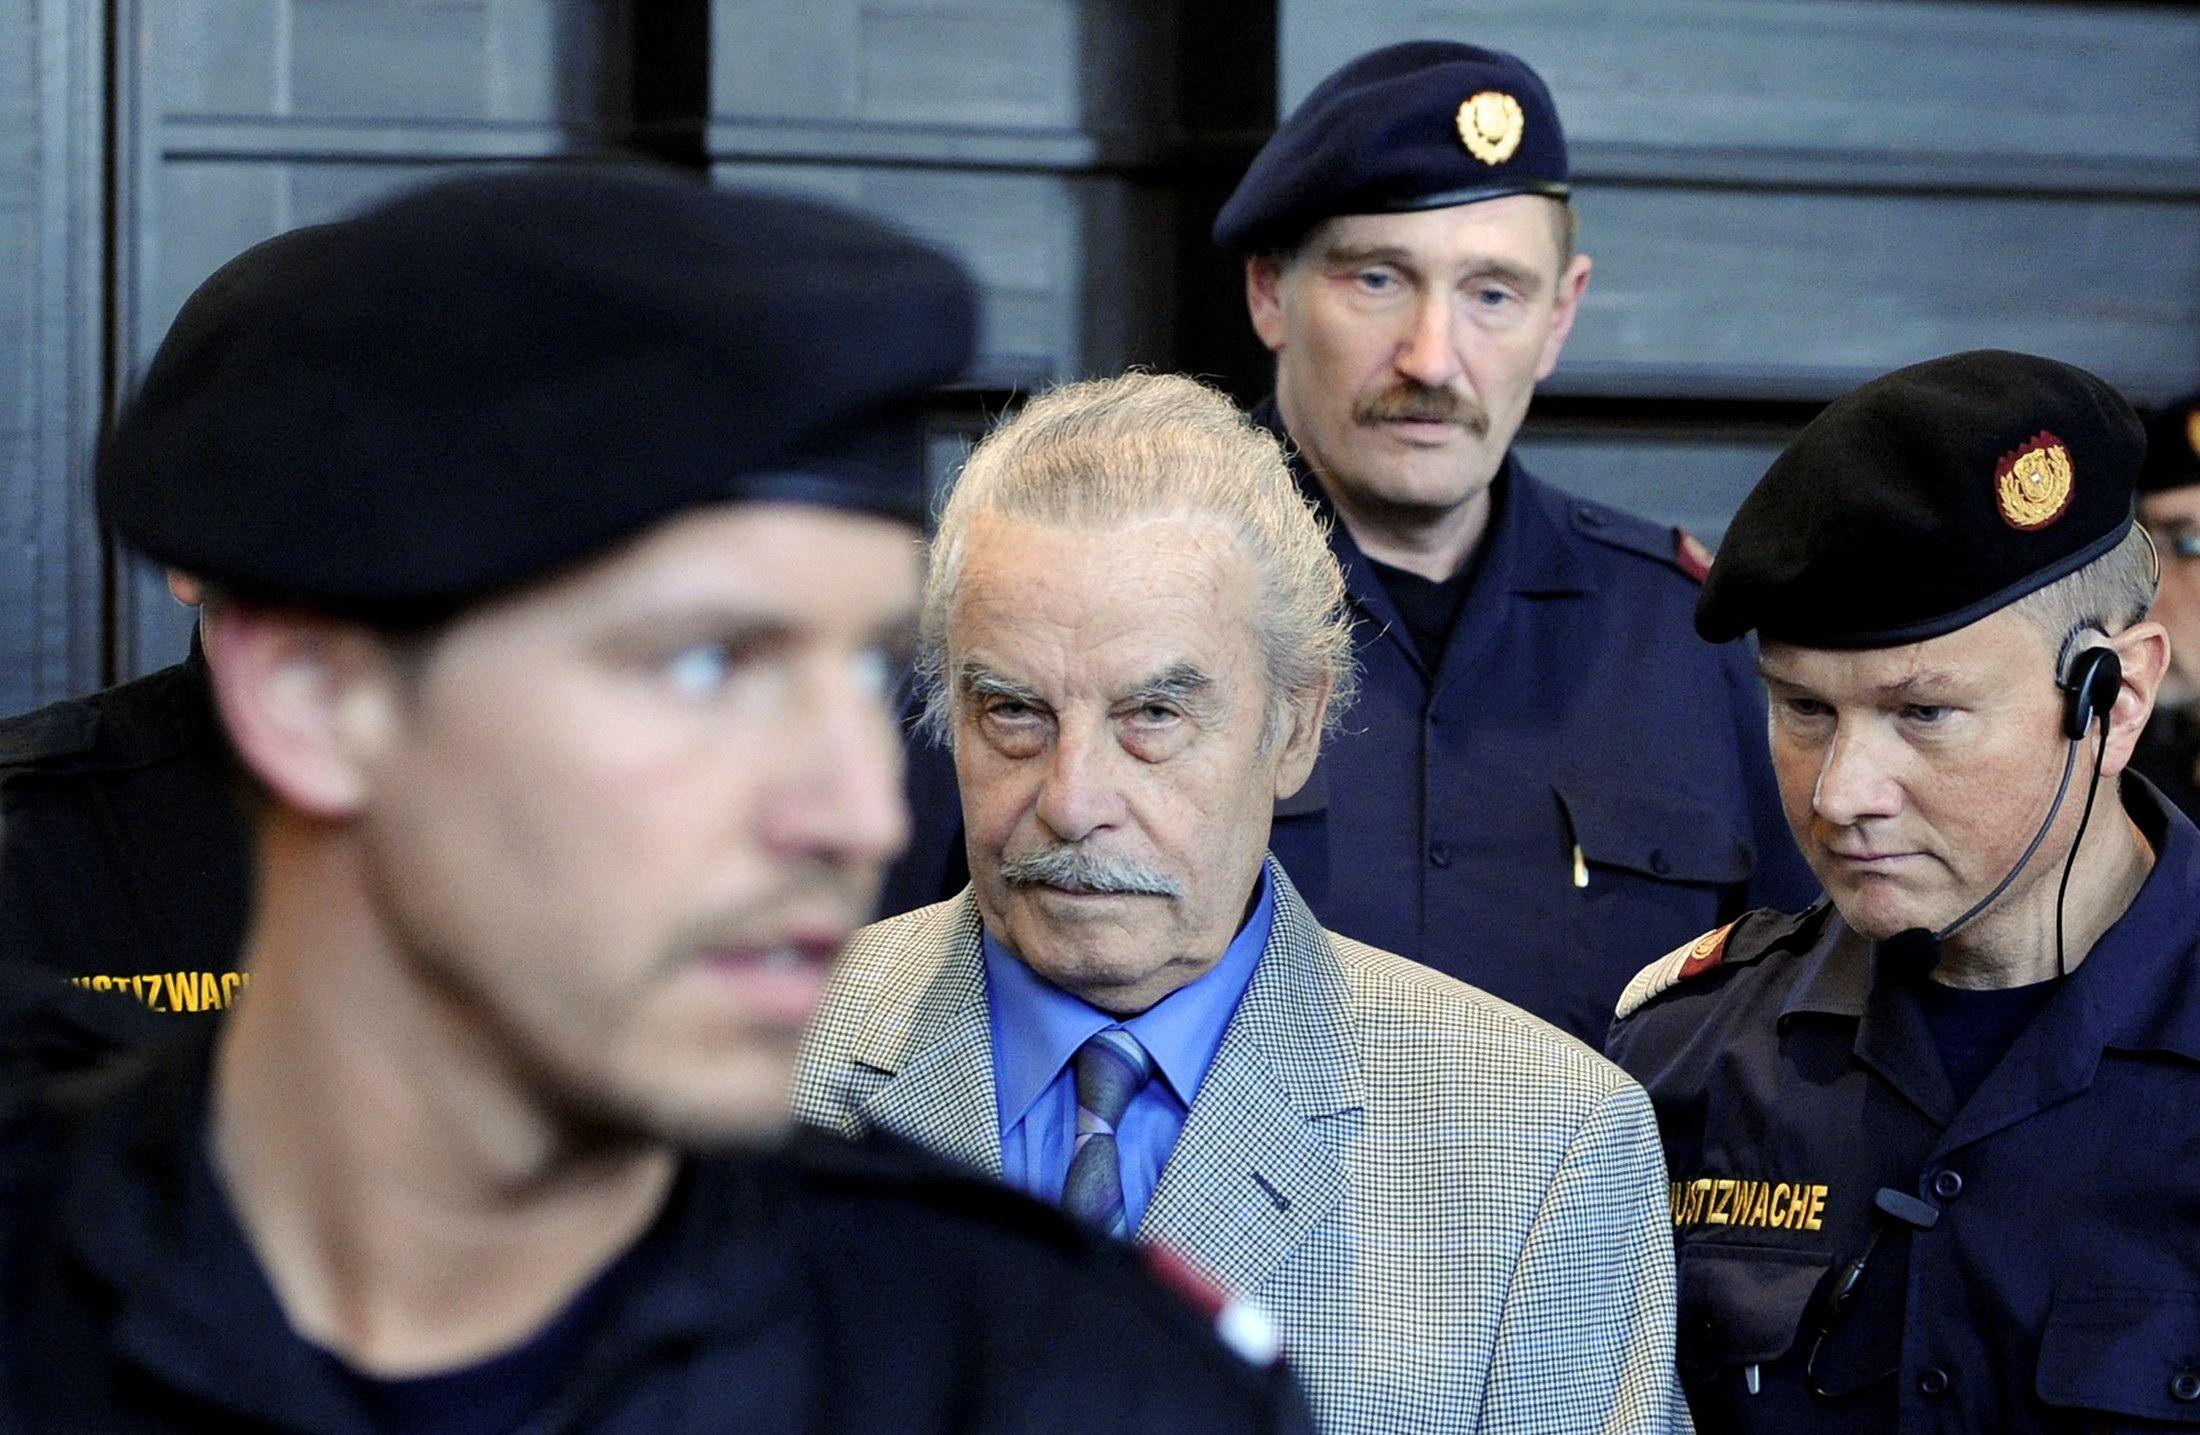 Josef Fritzl: Court approves move to normal prison